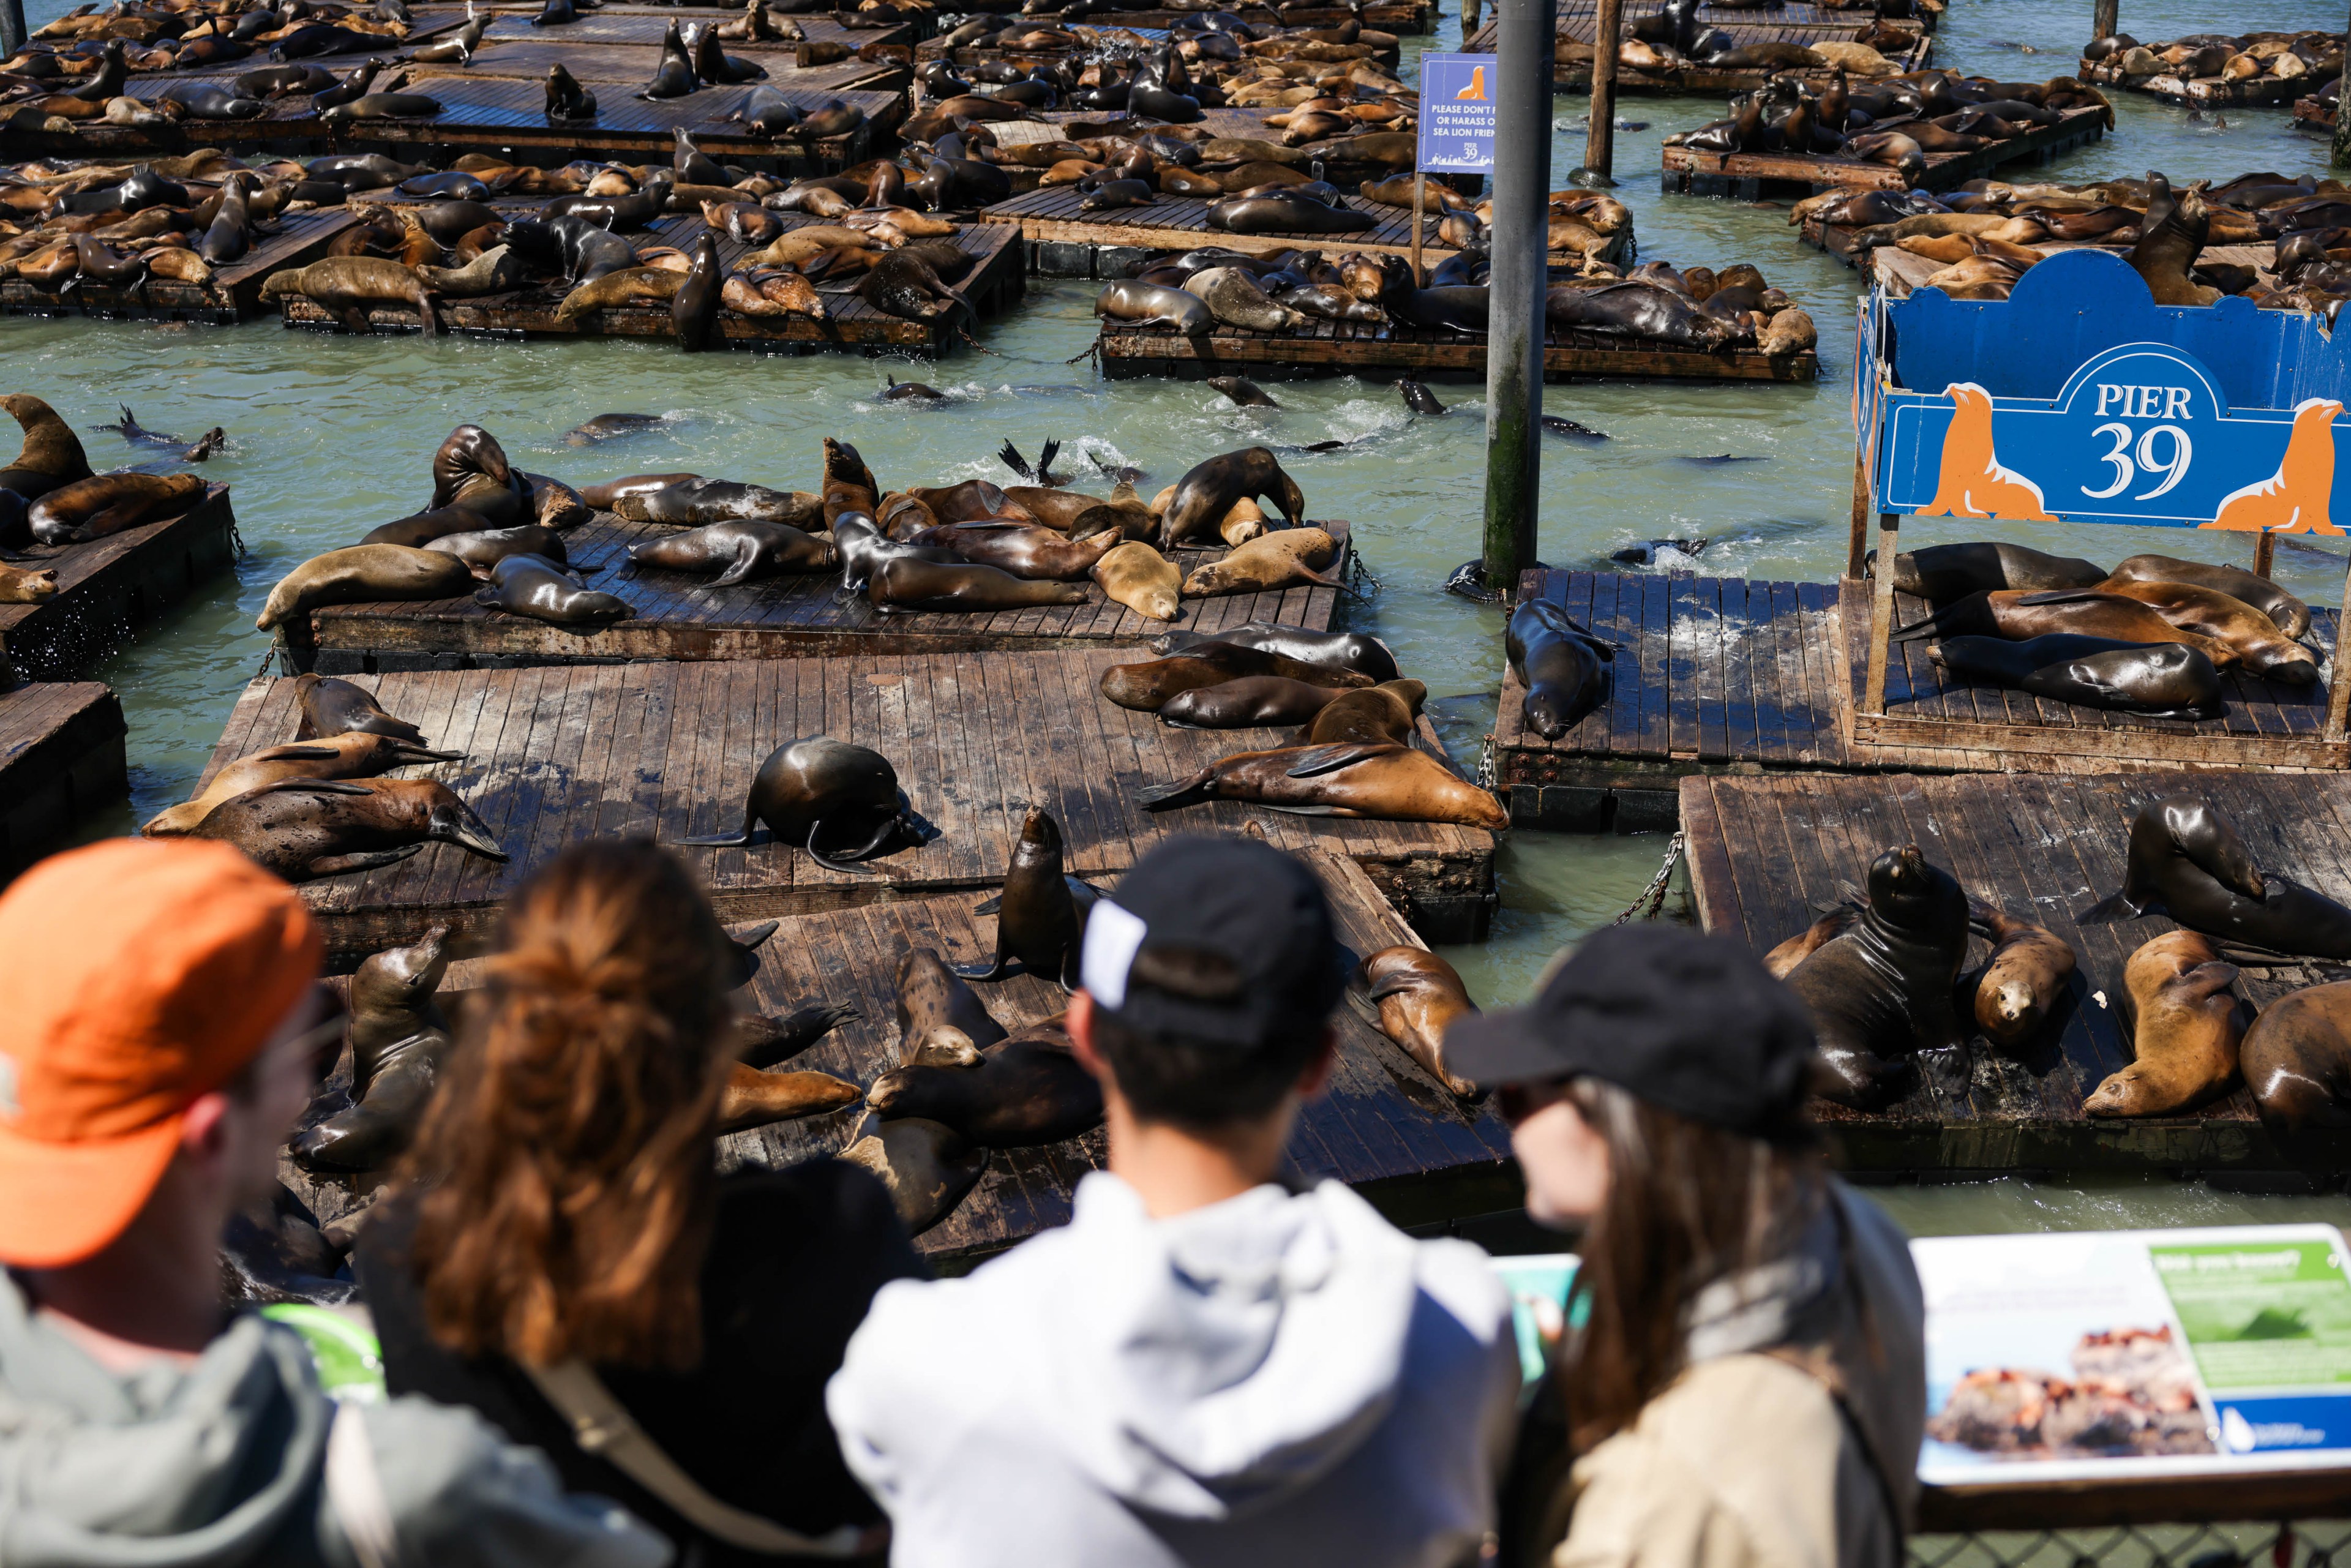 People watch sea lions basking on wooden platforms at Pier 39, with a sign visible.